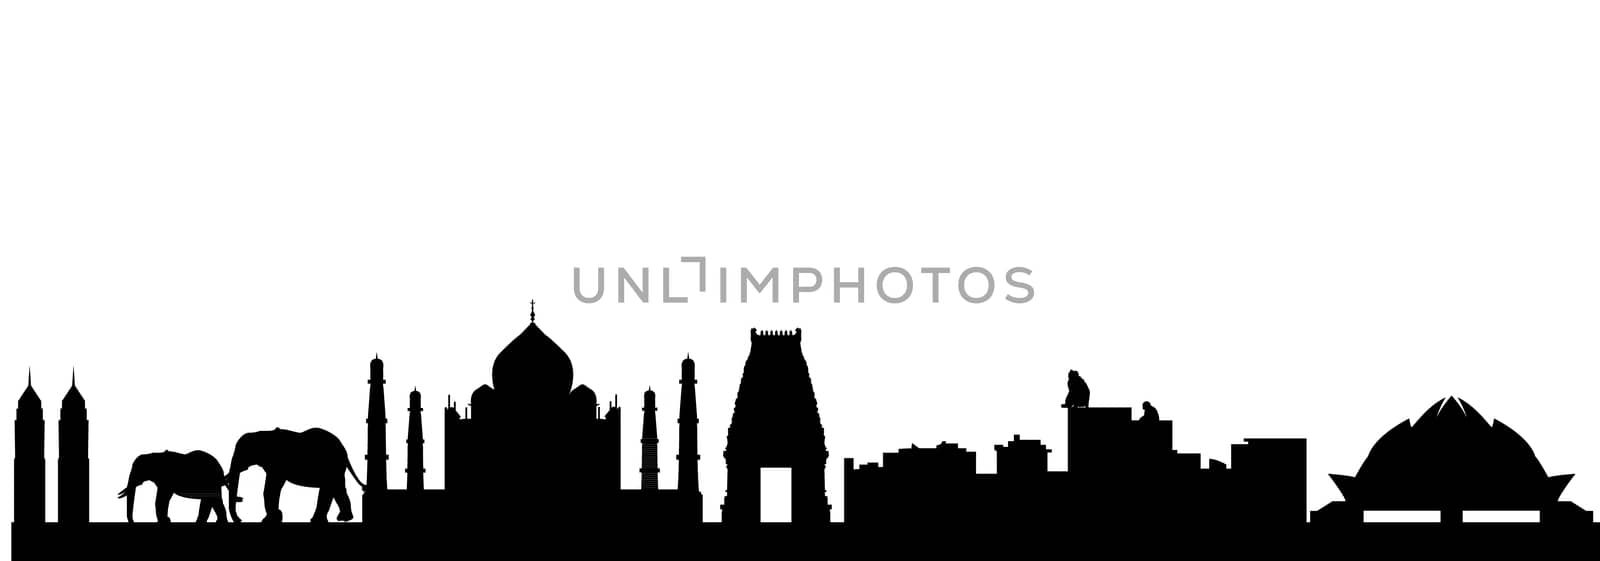 india skyline by compuinfoto